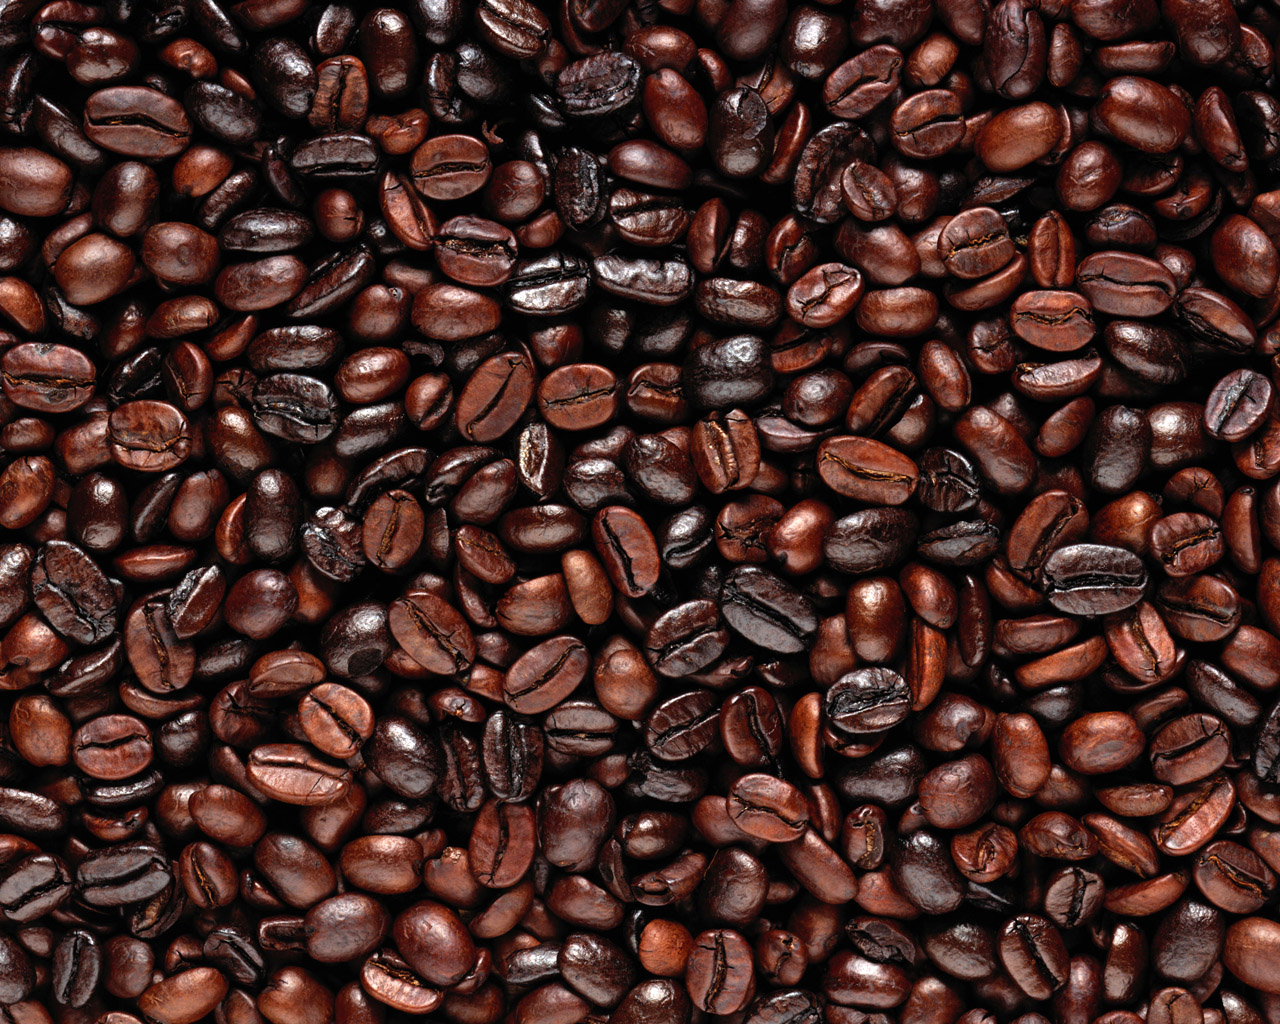 Coffee Beans should be a part of your prepping supplies.